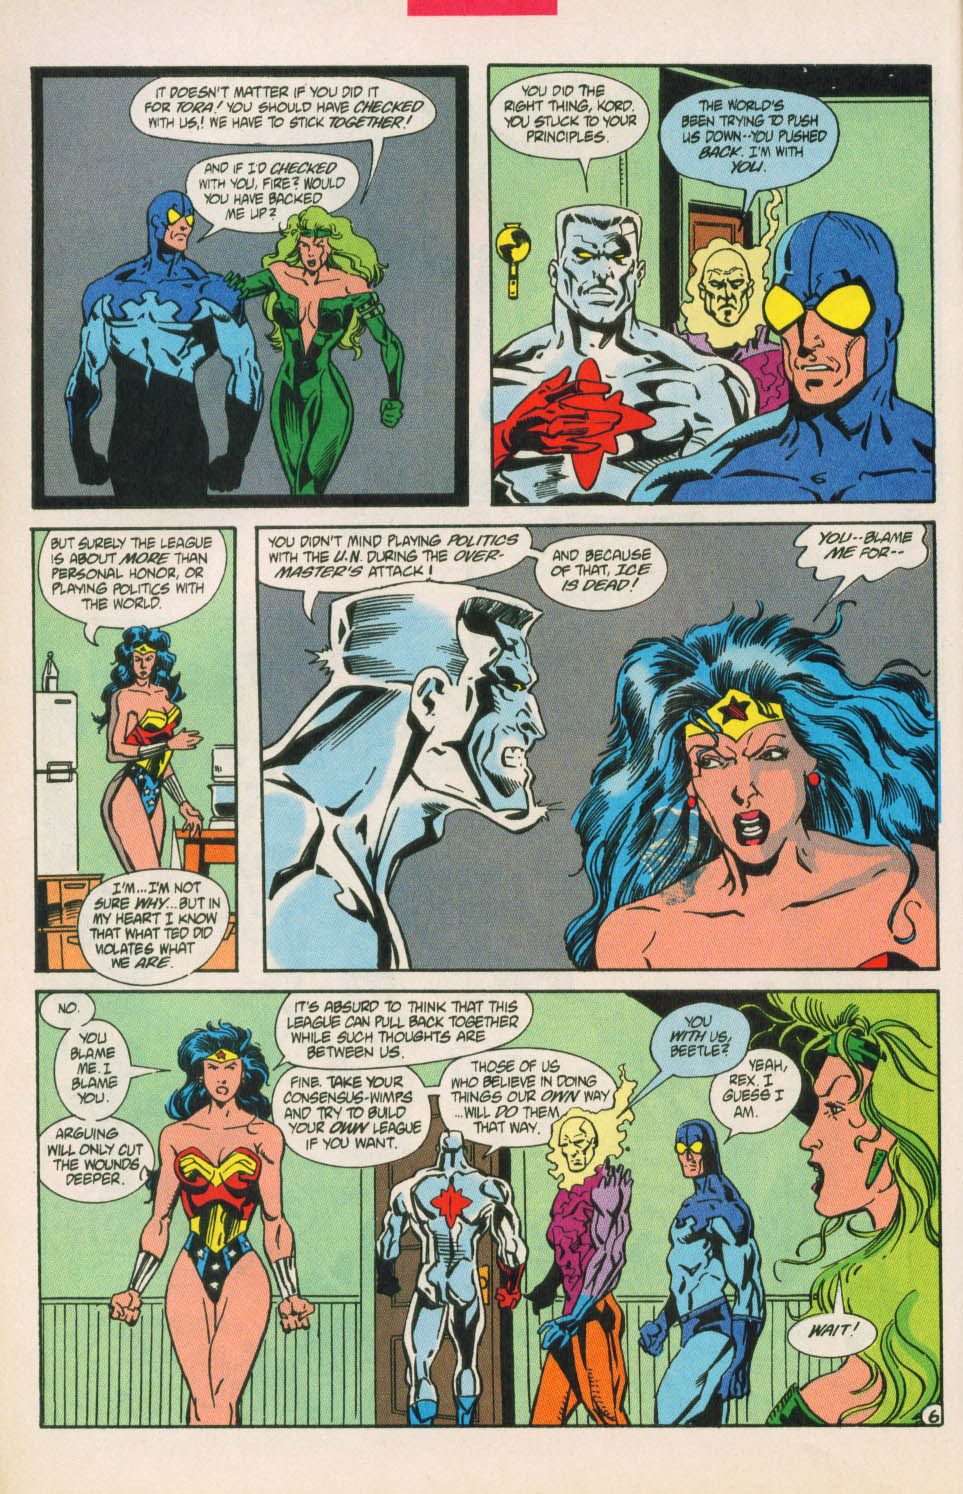 Justice League International (1993) 67 Page 6